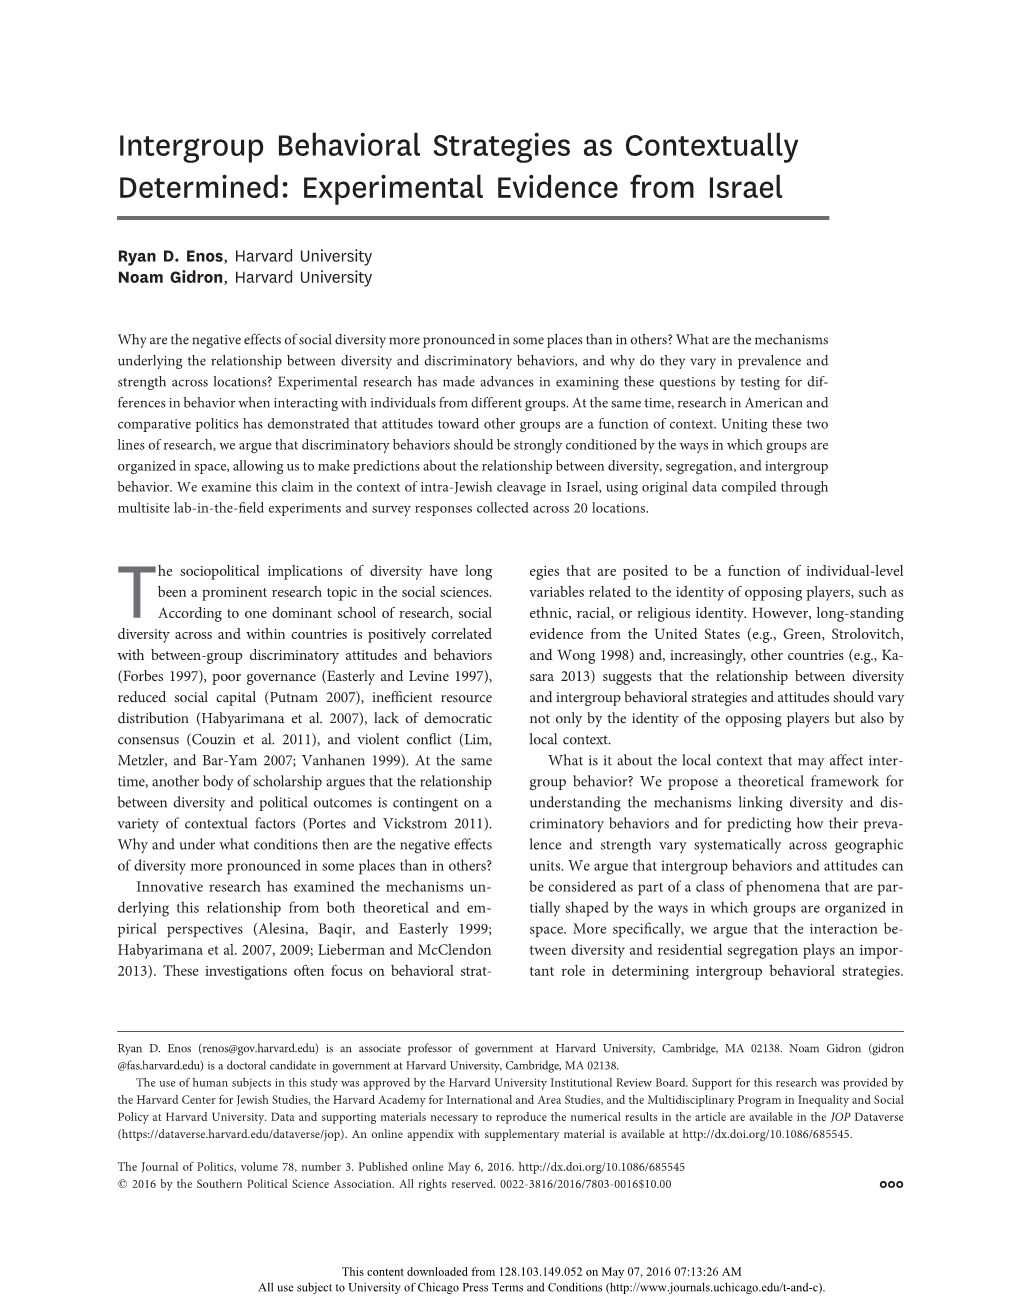 Intergroup Behavioral Strategies As Contextually Determined: Experimental Evidence from Israel